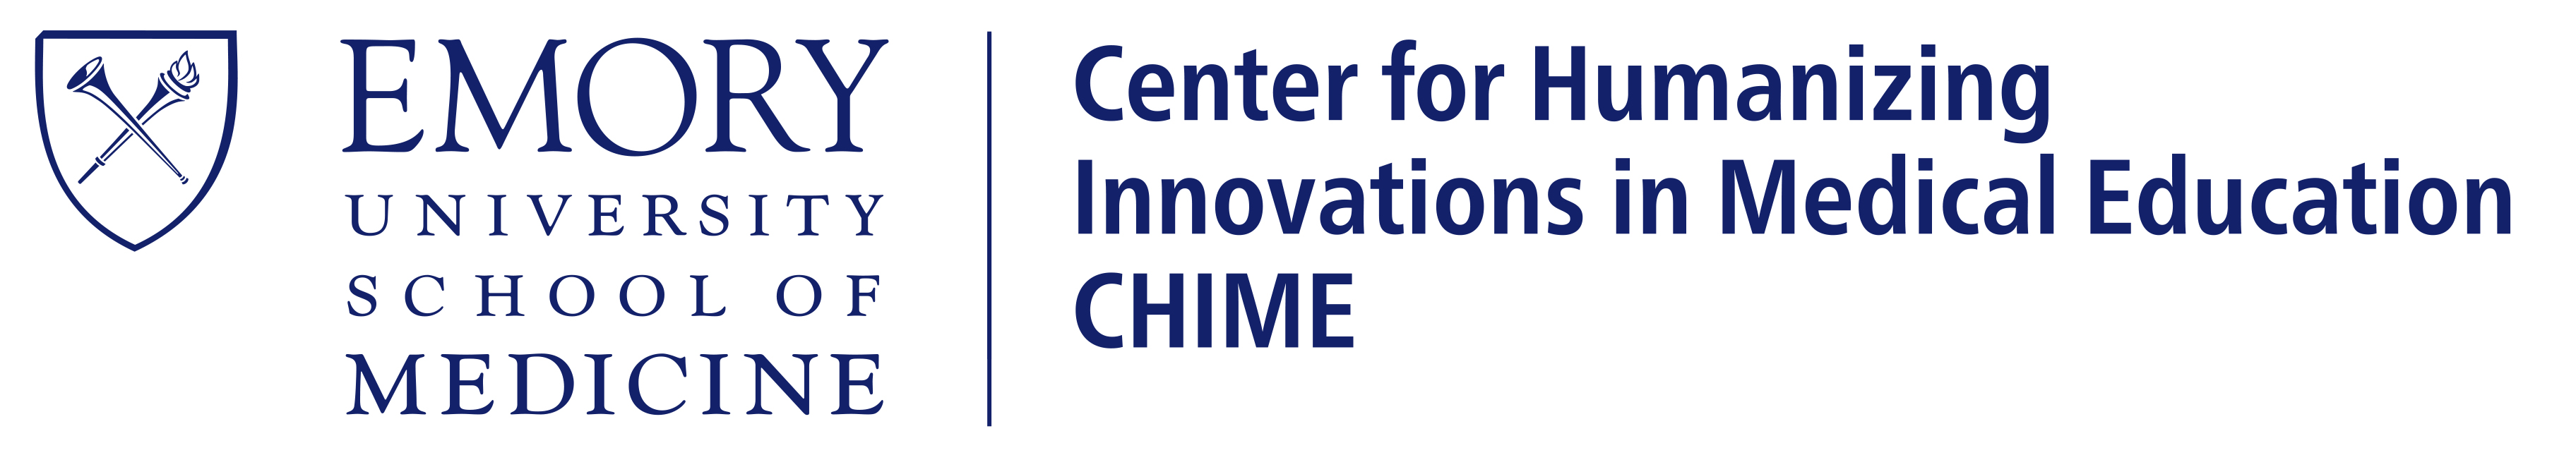 Emory School of Medicine Center for Humanizing Innovations in Medicine Education